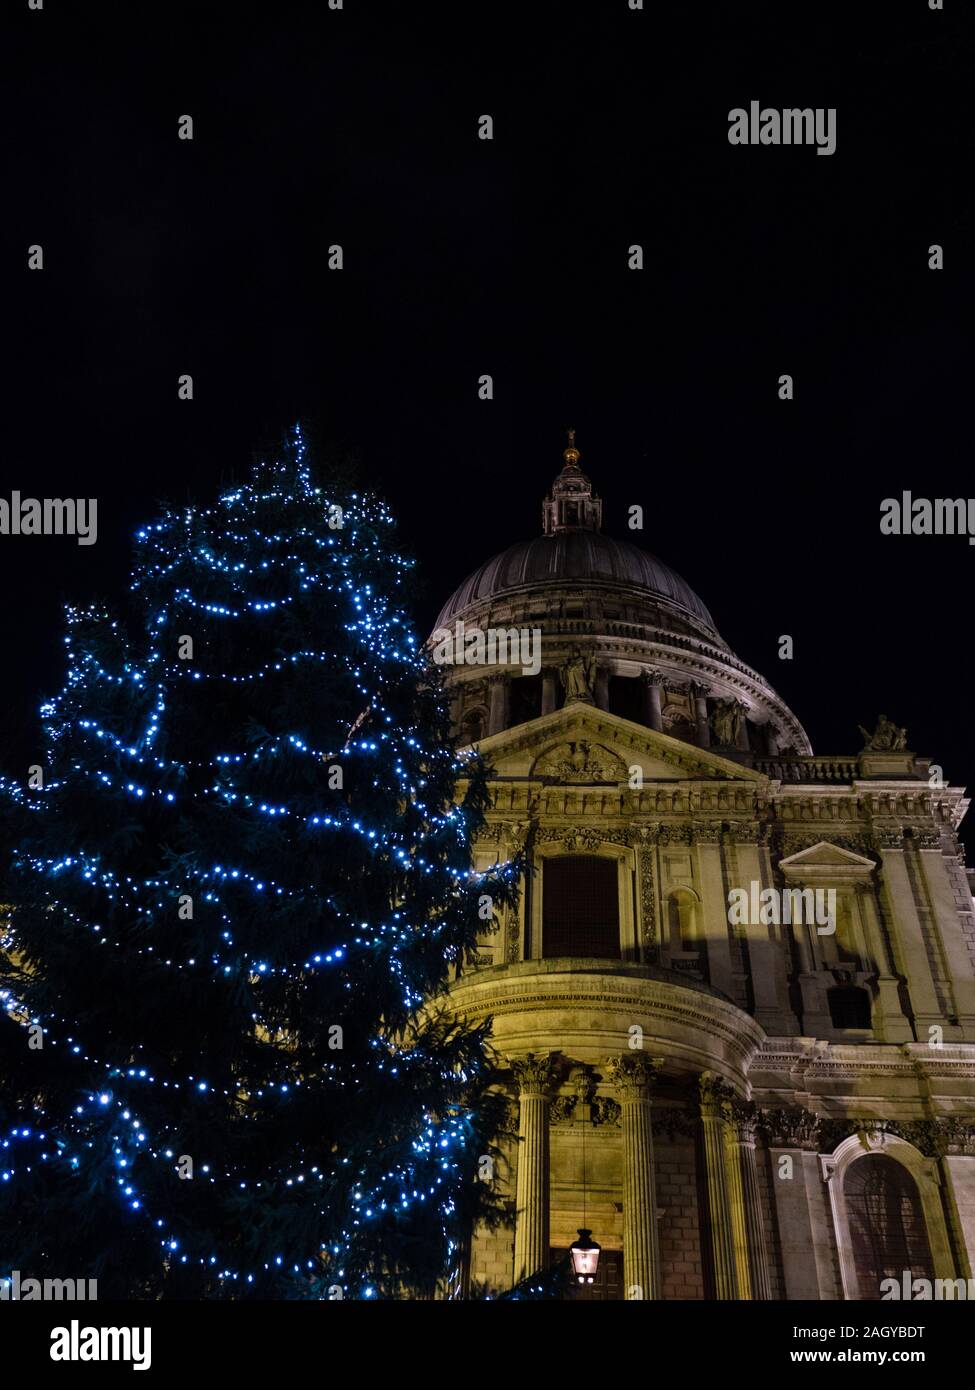 Christmas Tree, St Paul's Cathedral, Night Time, London, England, UK,GB. Stock Photo